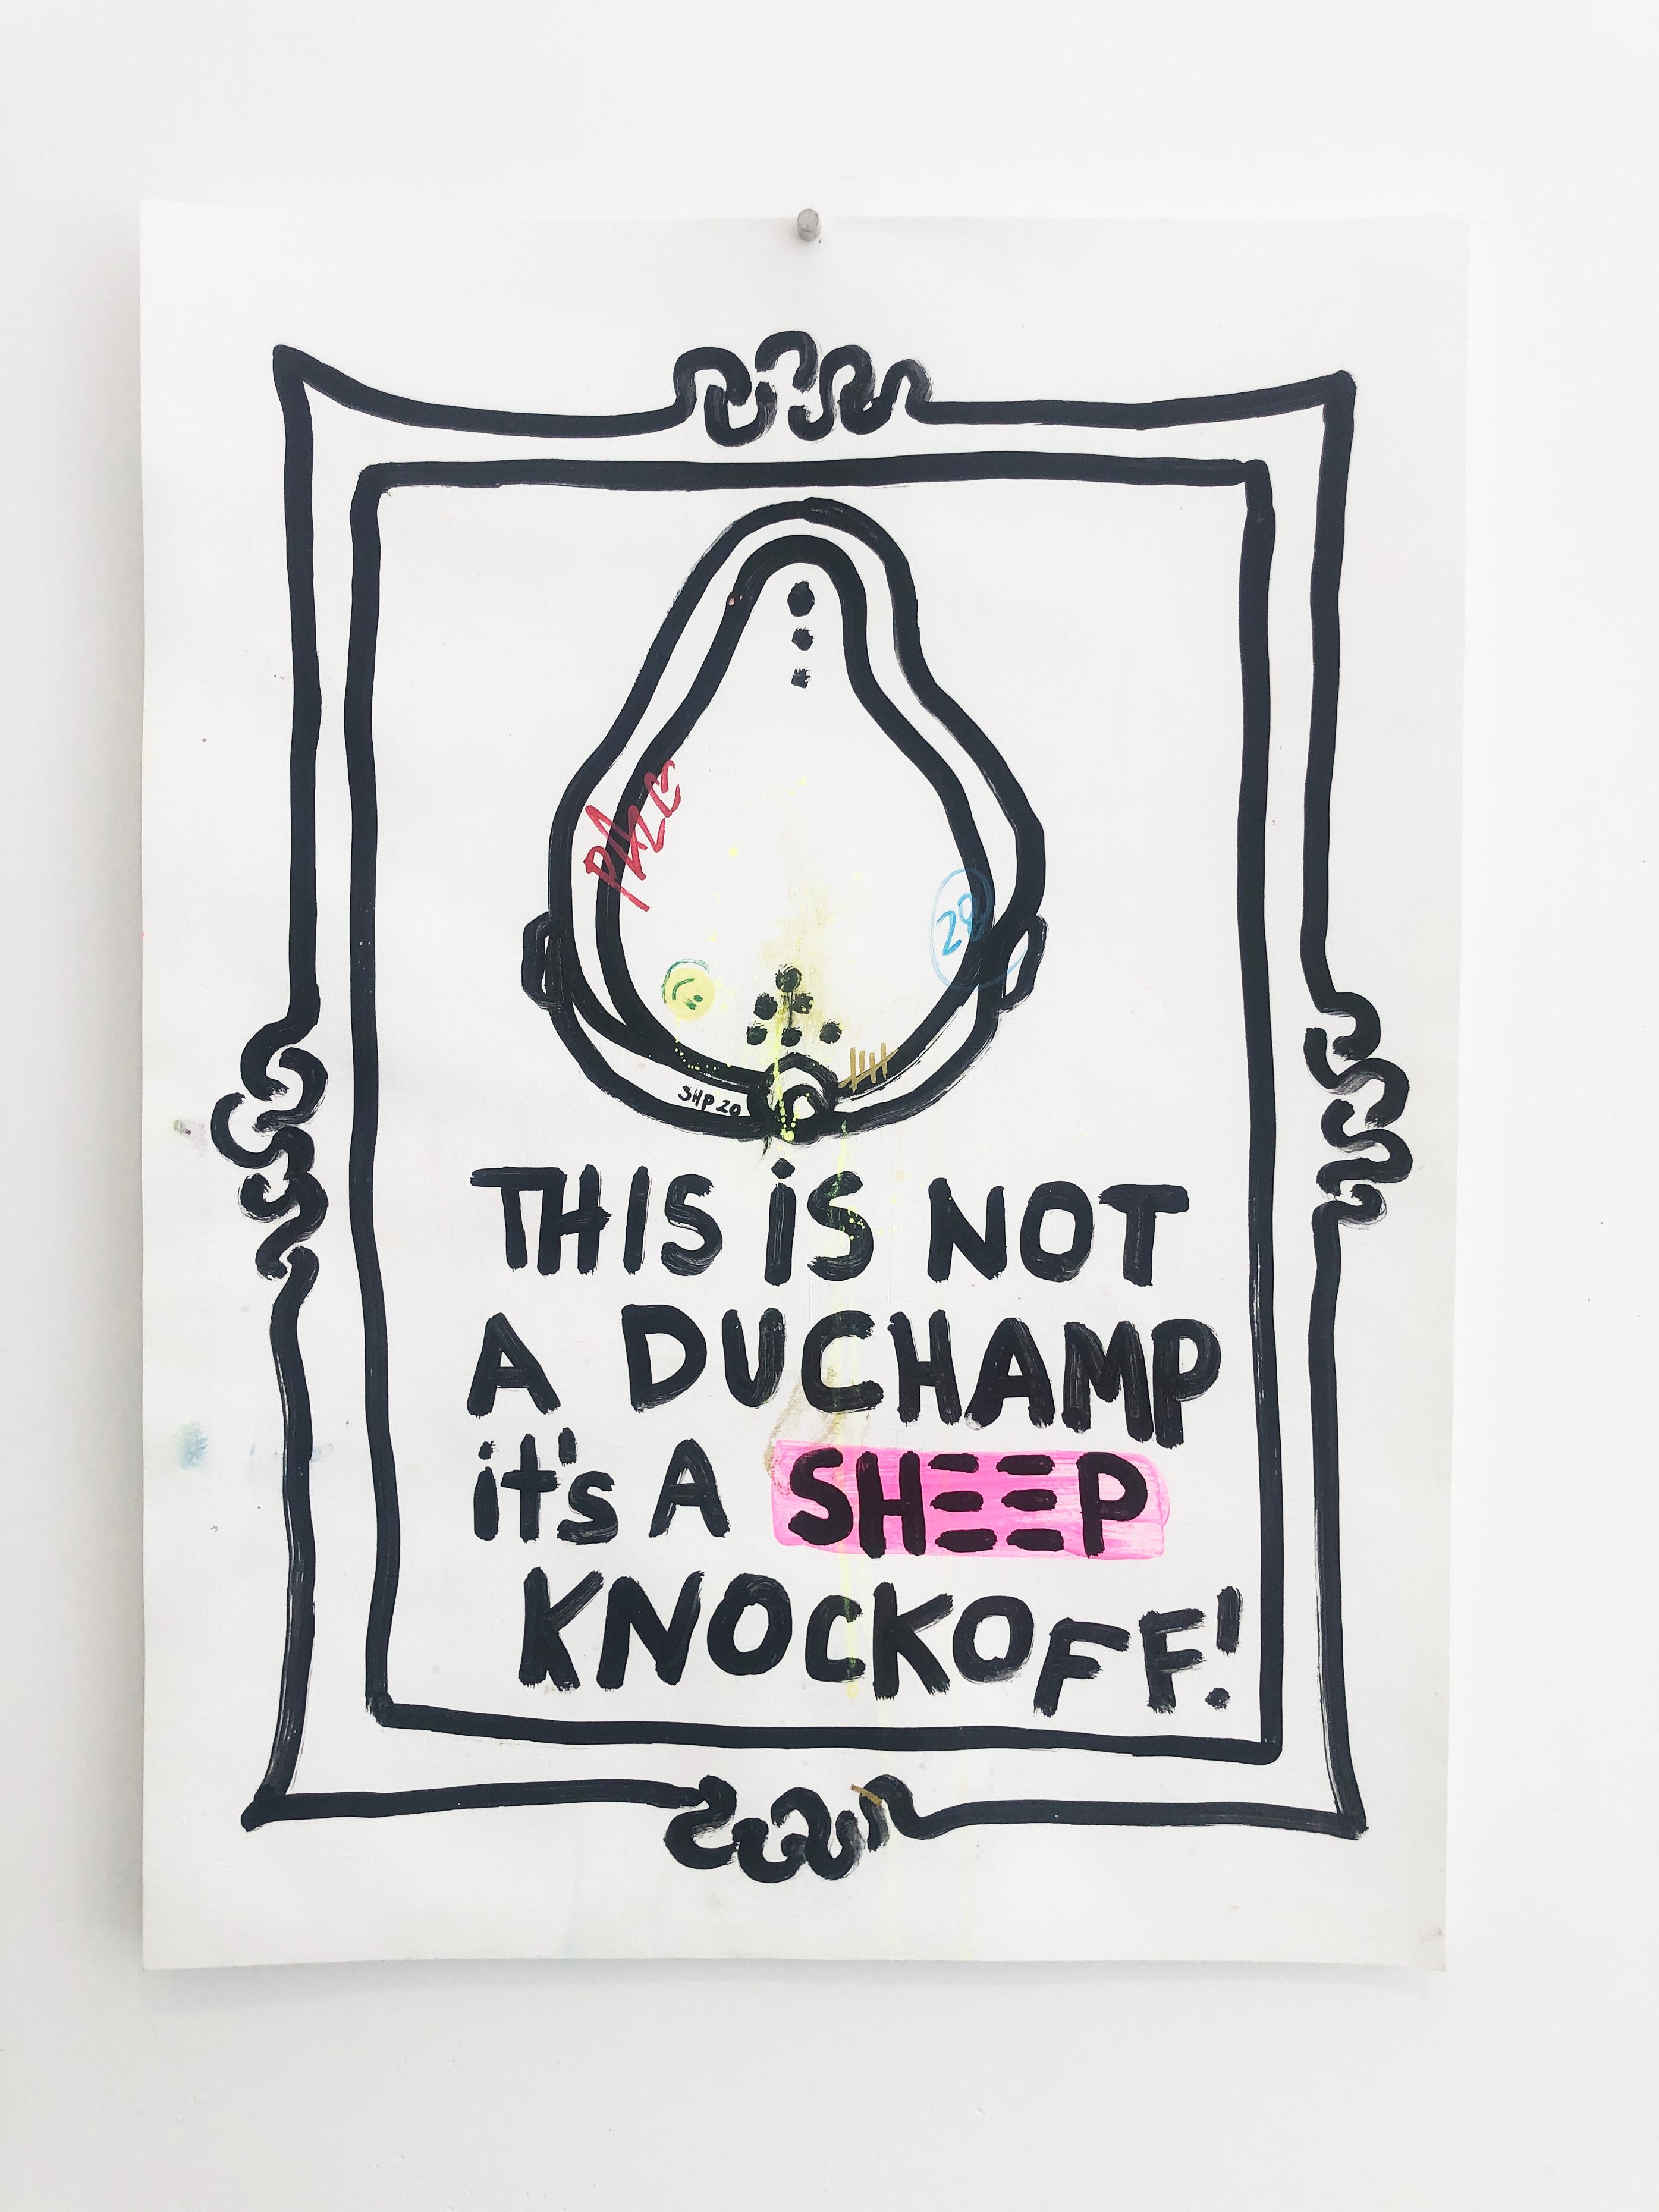 It's a Knockoff - Duchamp   acrylic on paper - Painting by Little Ricky